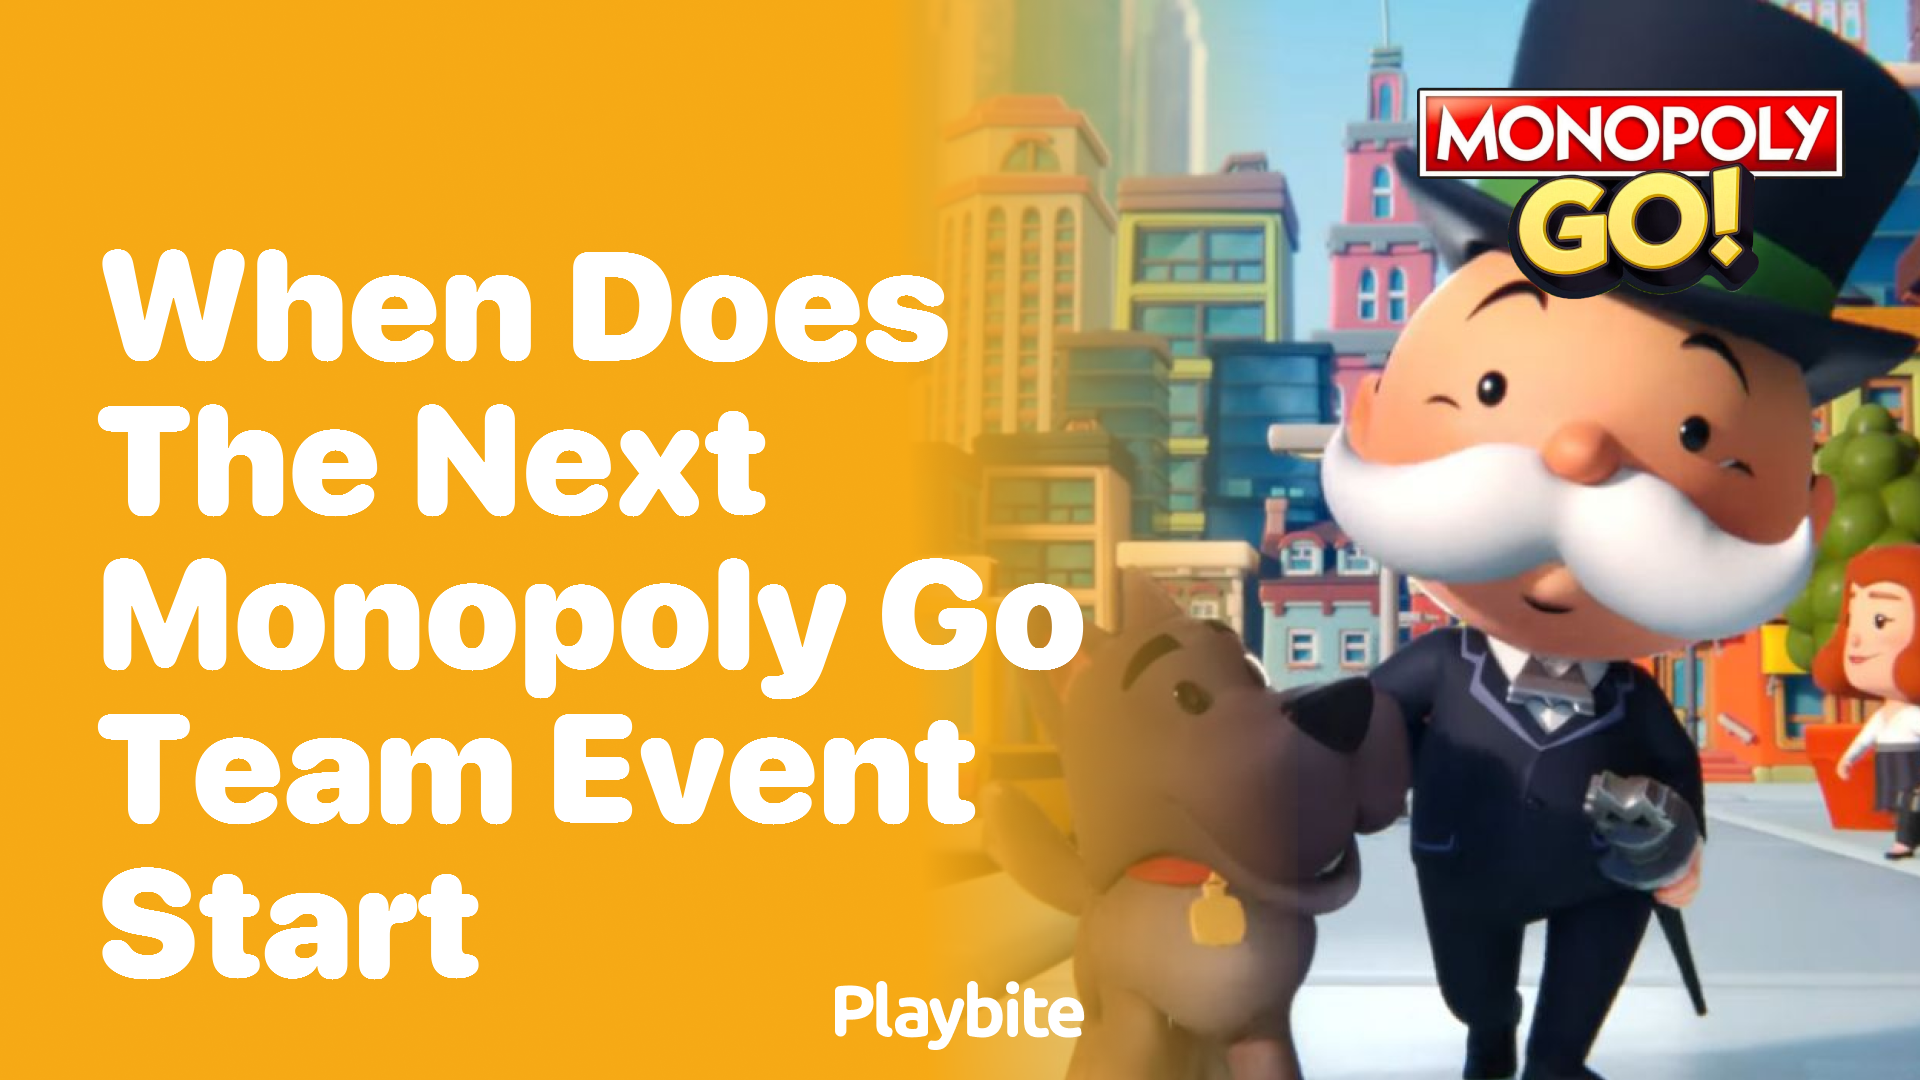 When Does the Next Monopoly Go Team Event Start?